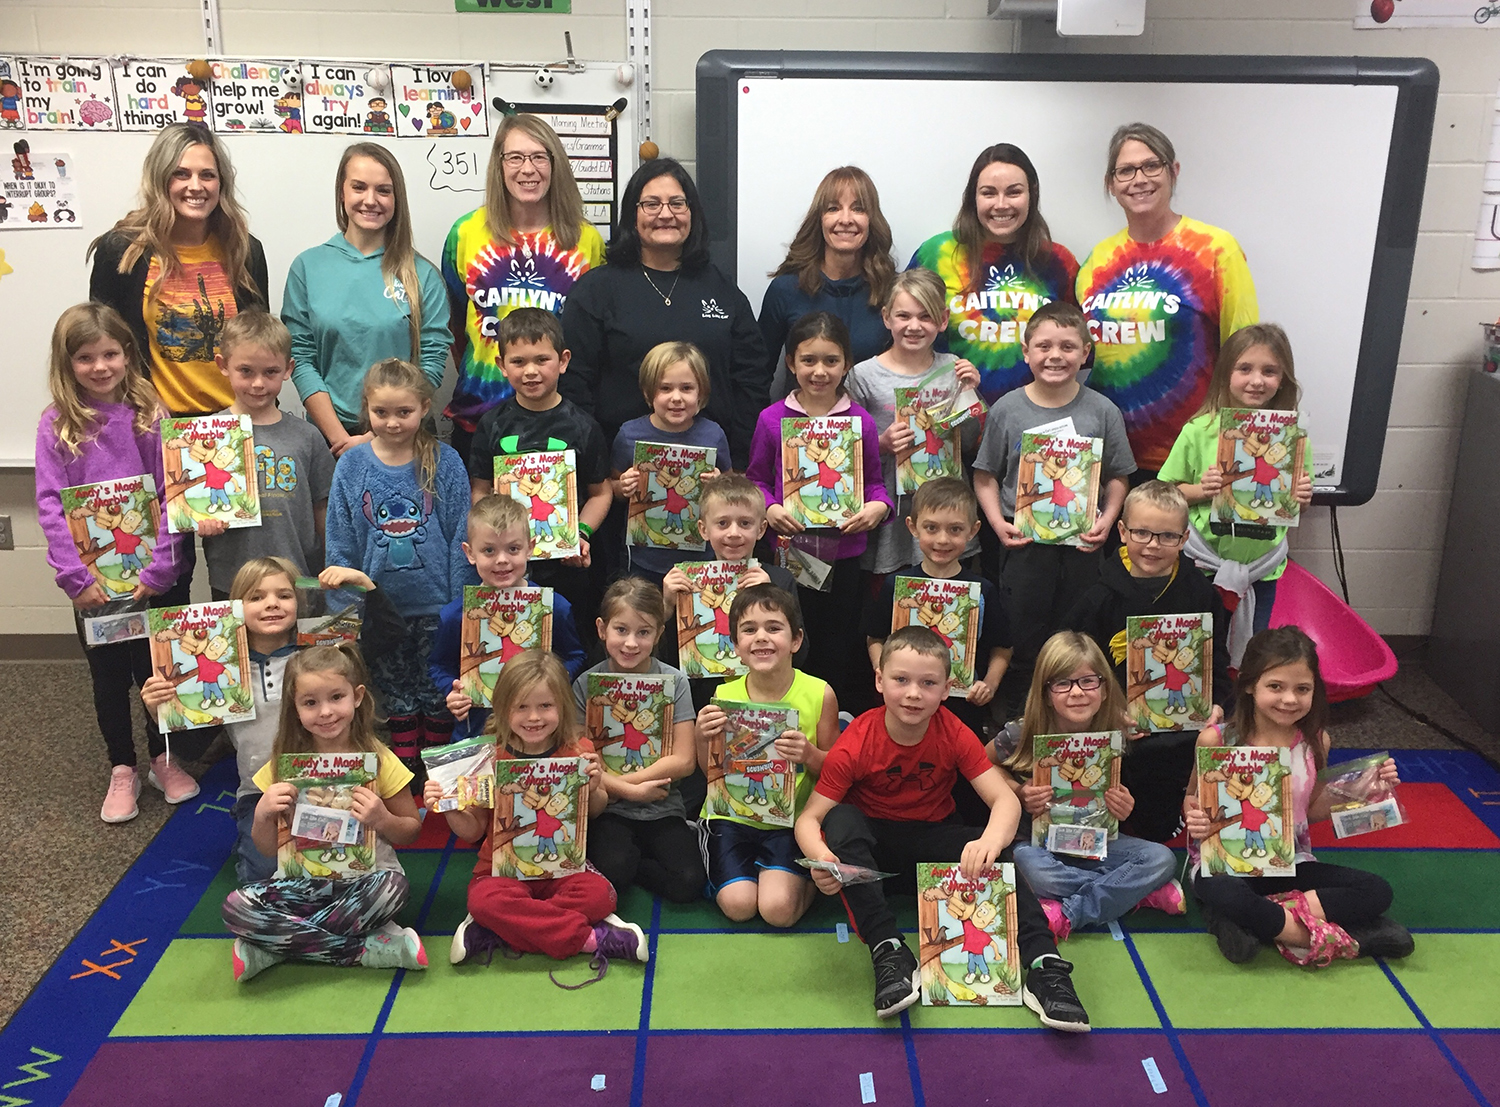 Book giveaway for Mrs. Mriden and Mrs. Bunkers 1st grade room at West Central on Dec 13